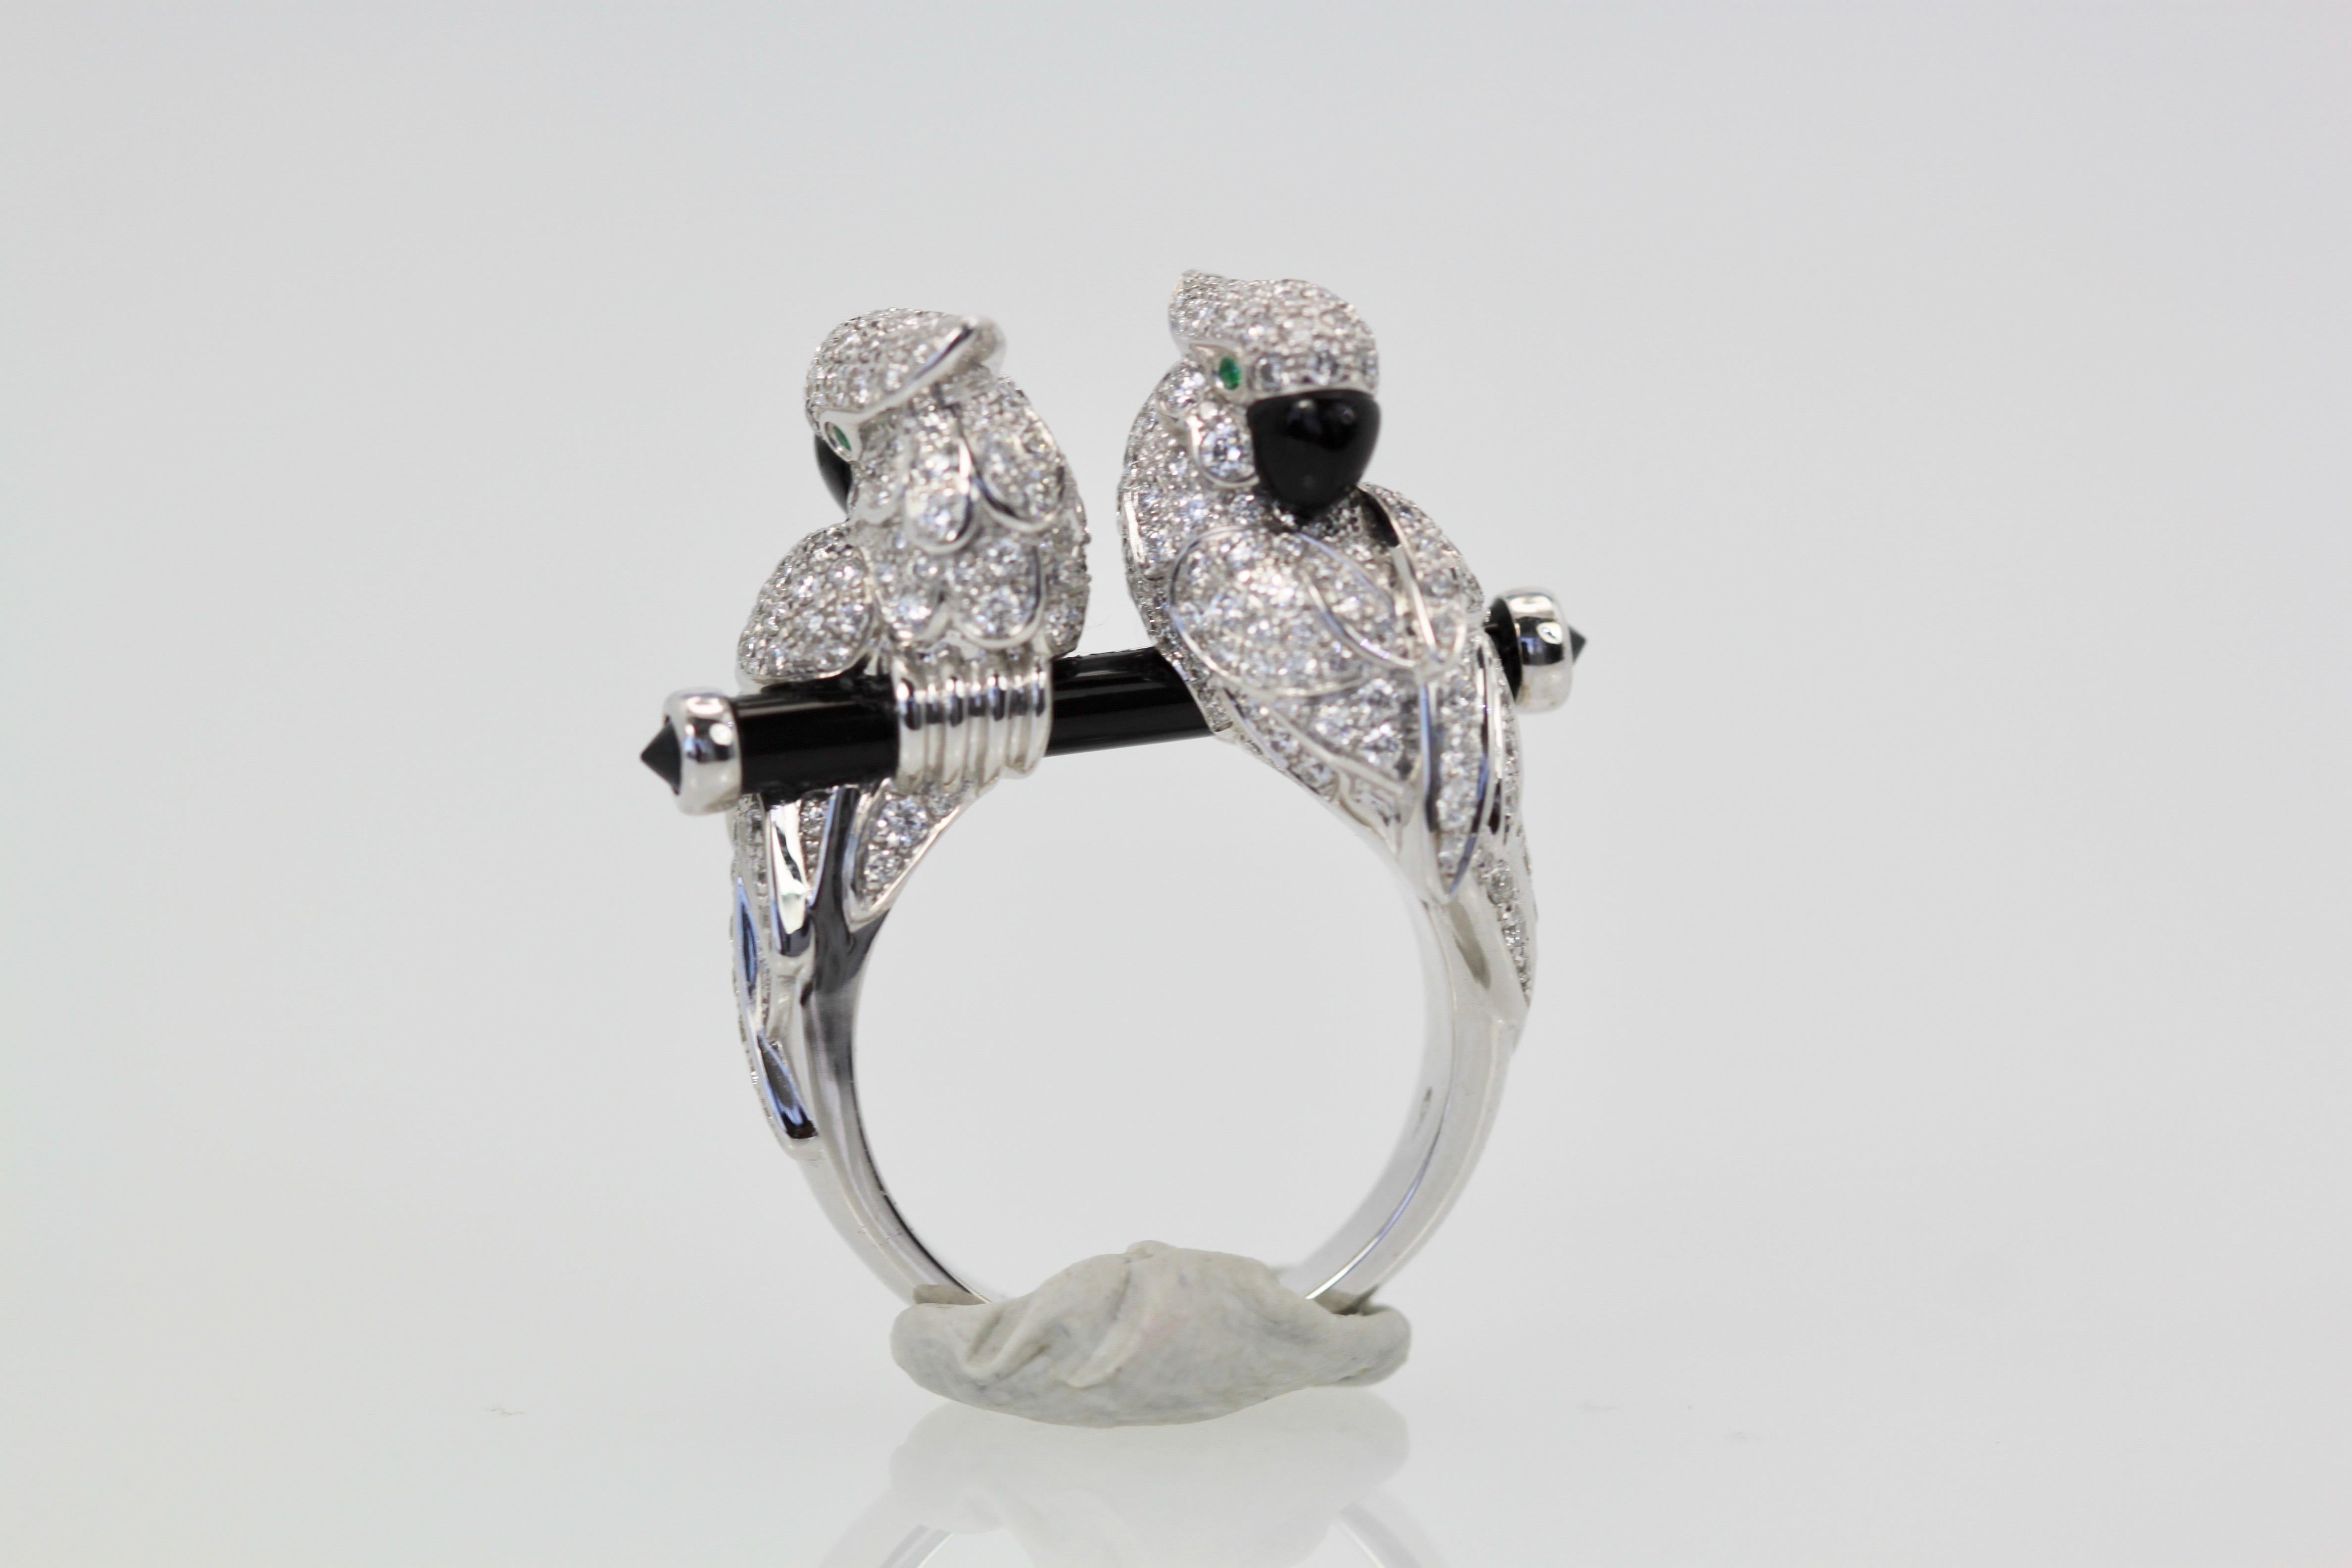 This ring from Cartier is rare and highly coveted.  It is from the Les Oiseau Liberes collection which includes pendant, bracelet and earrings which are extremely hard to find, as was this piece.  These parrots are sitting on an onyx branch doted on